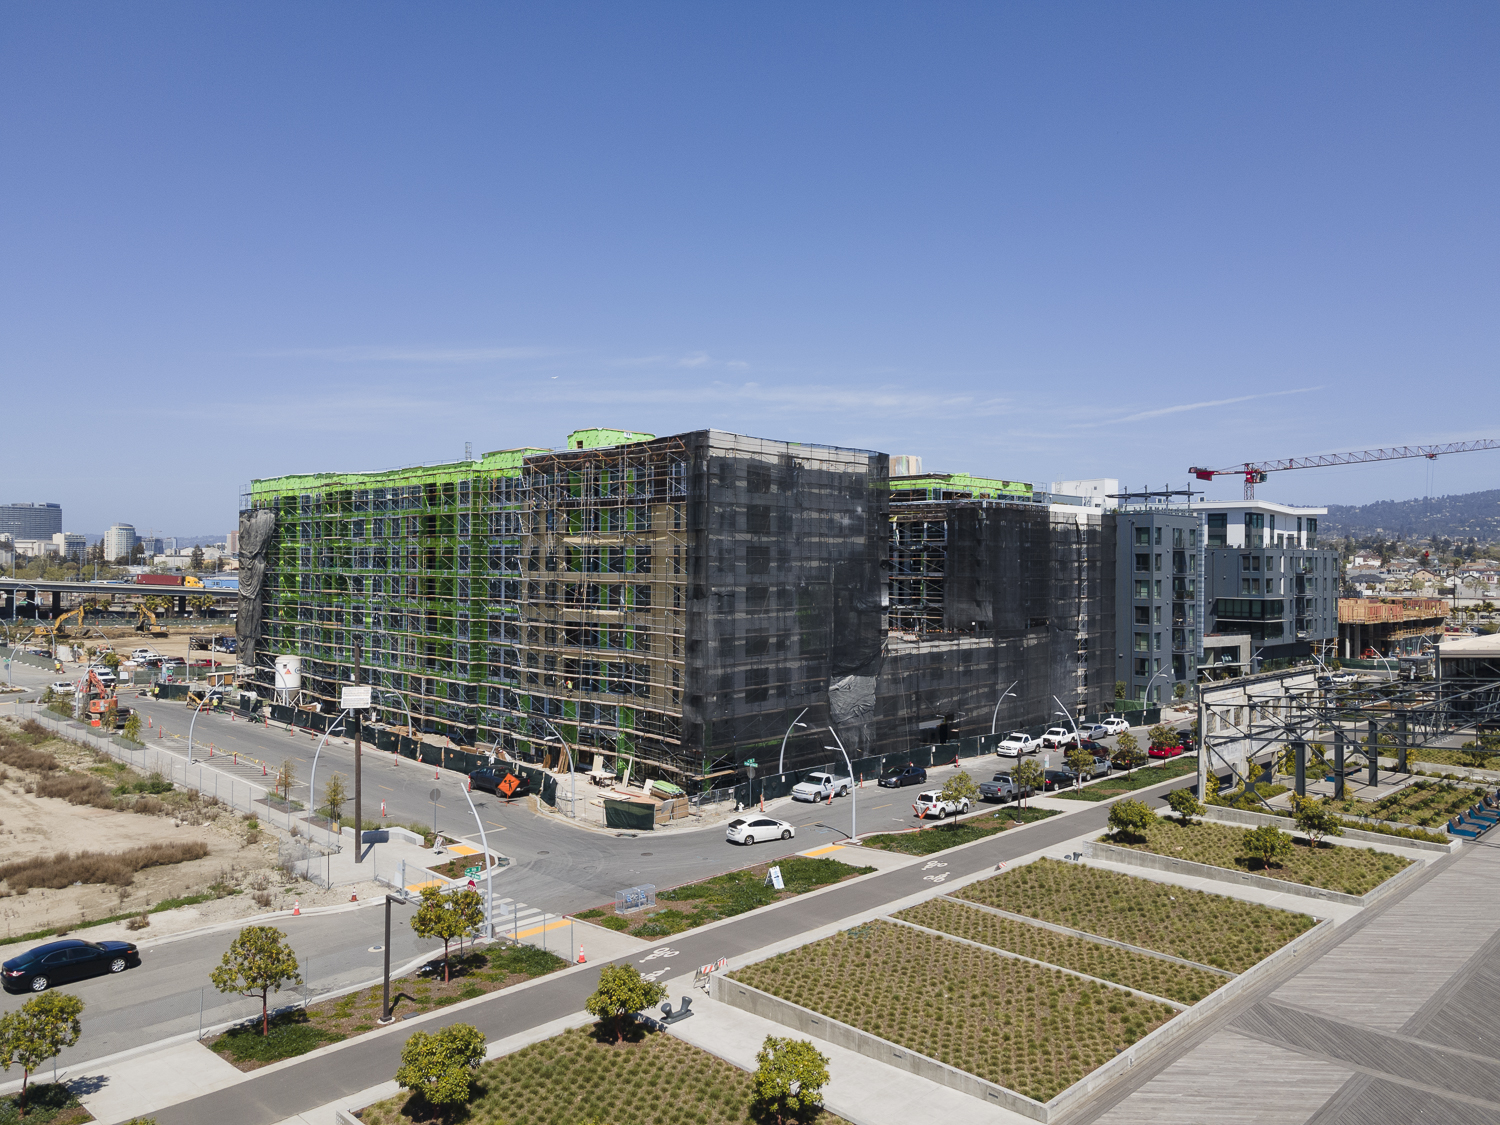 Brooklyn Basin Parcel C construction, image by Andrew Campbell Nelson